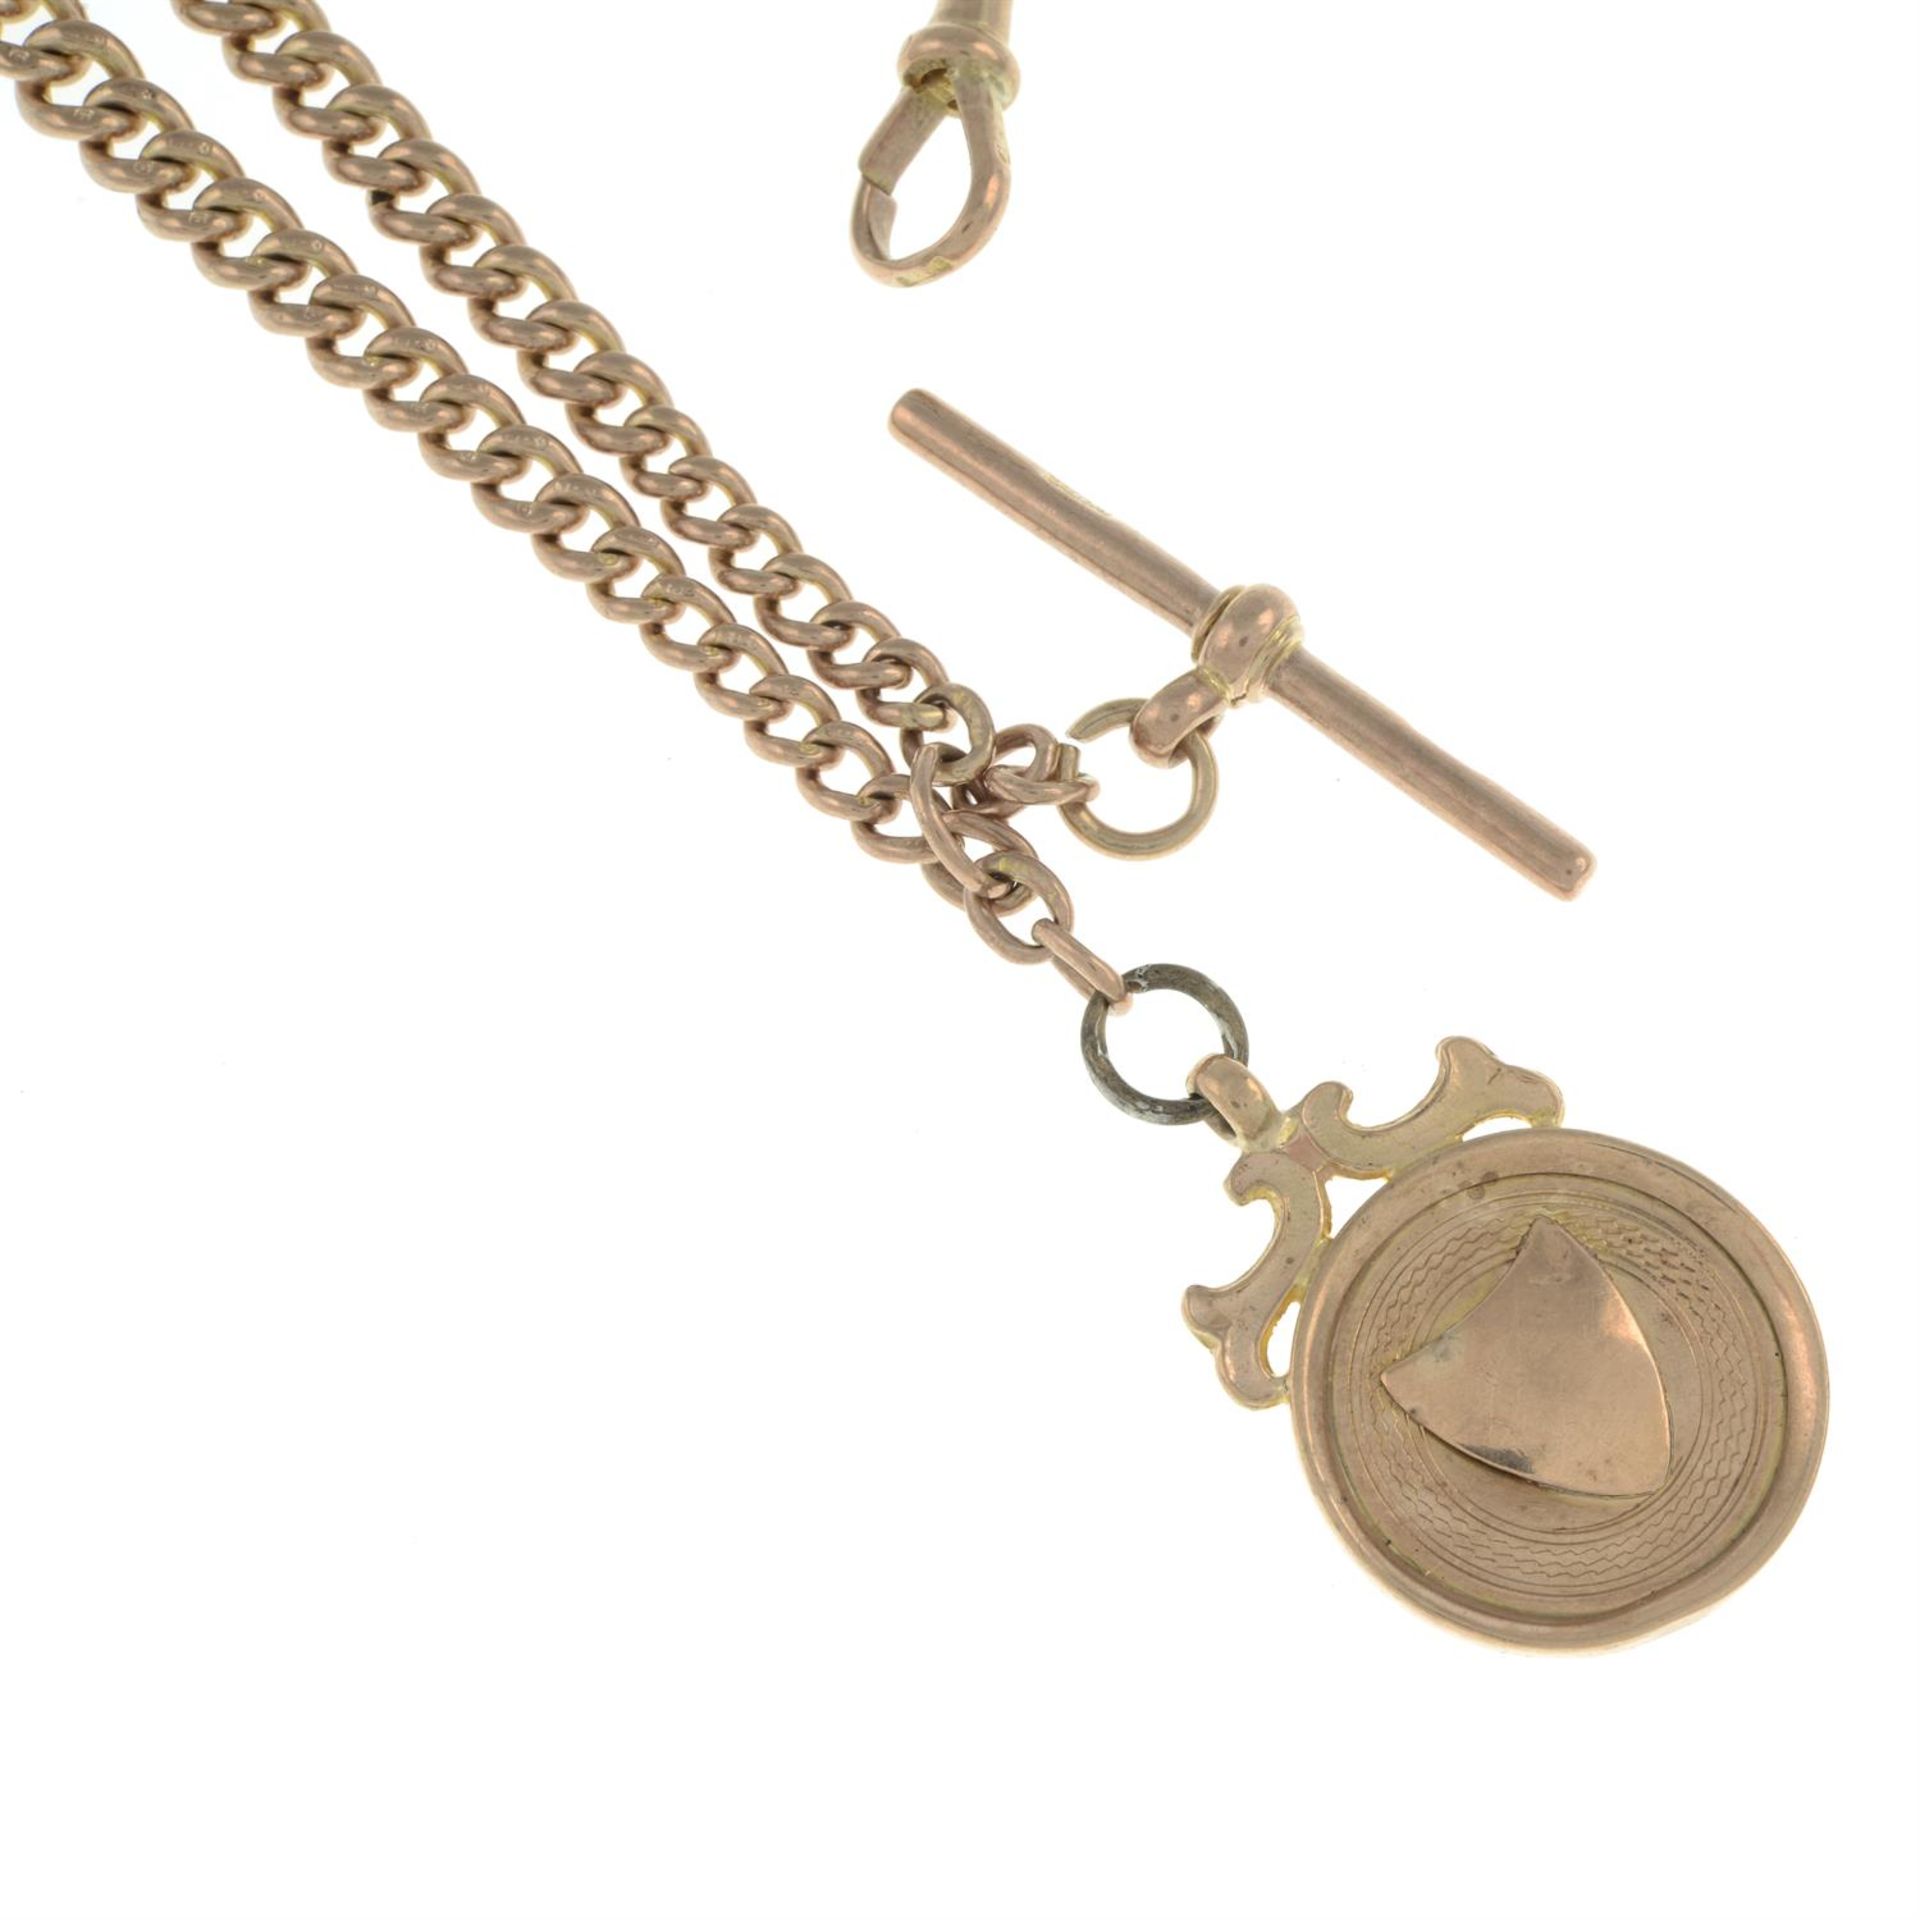 9ct gold Albert chain, with 9ct gold fob - Image 2 of 2